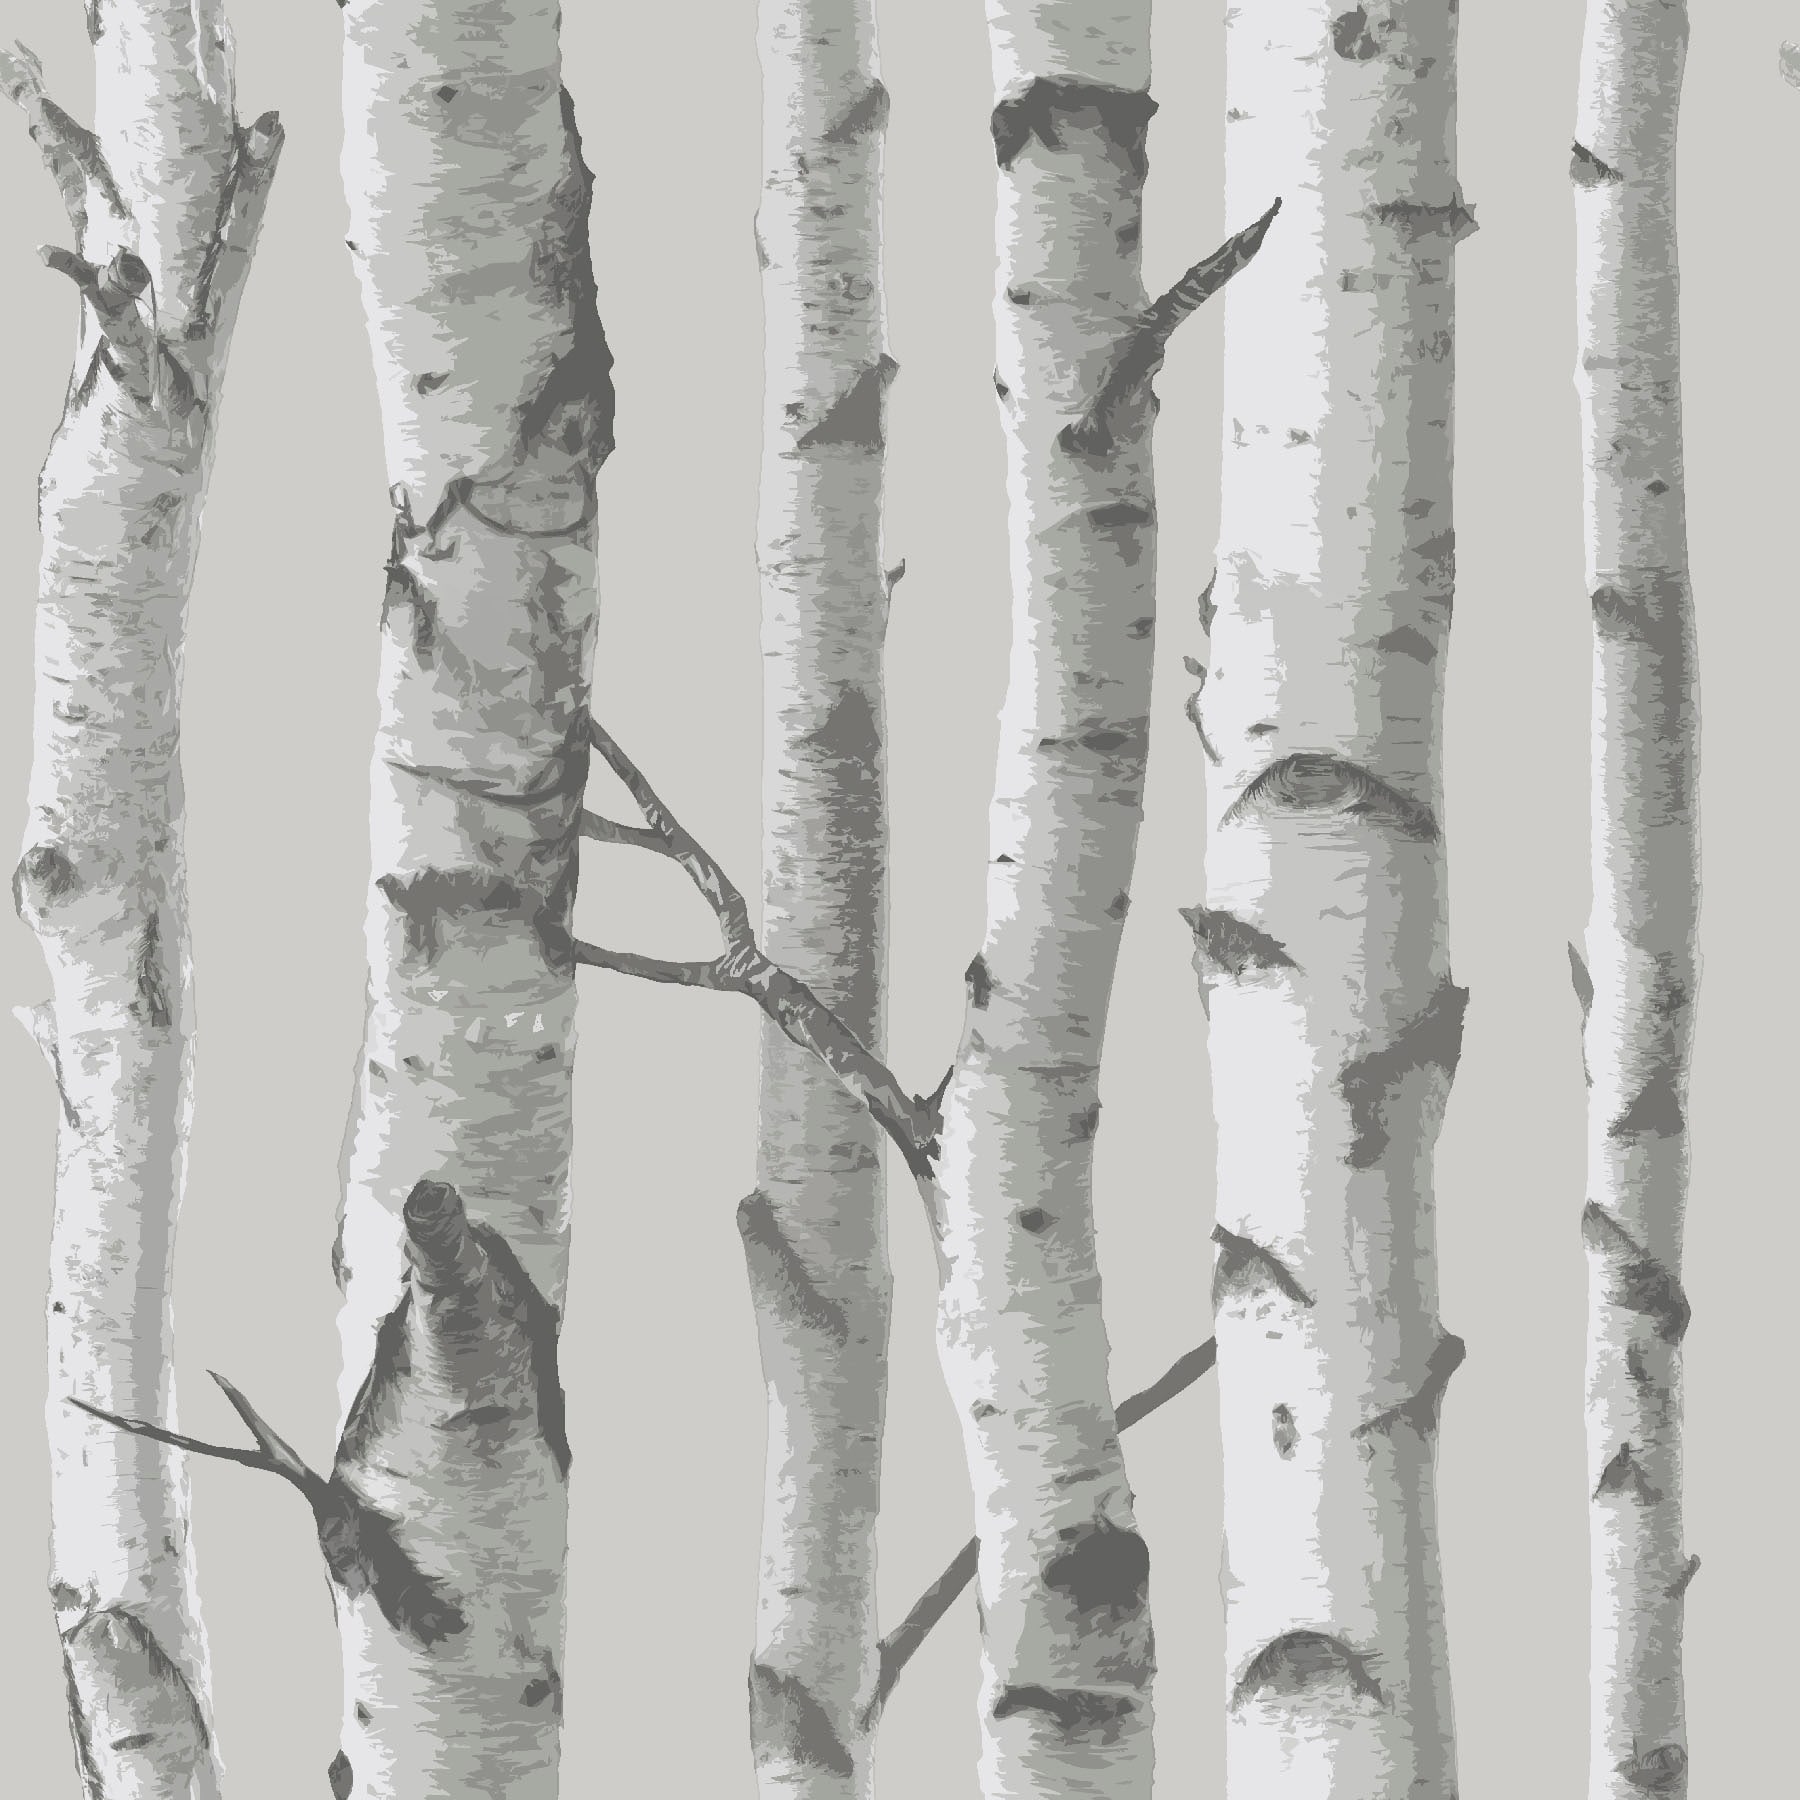 500 Birch Tree Pictures HD  Download Free Images on Unsplash